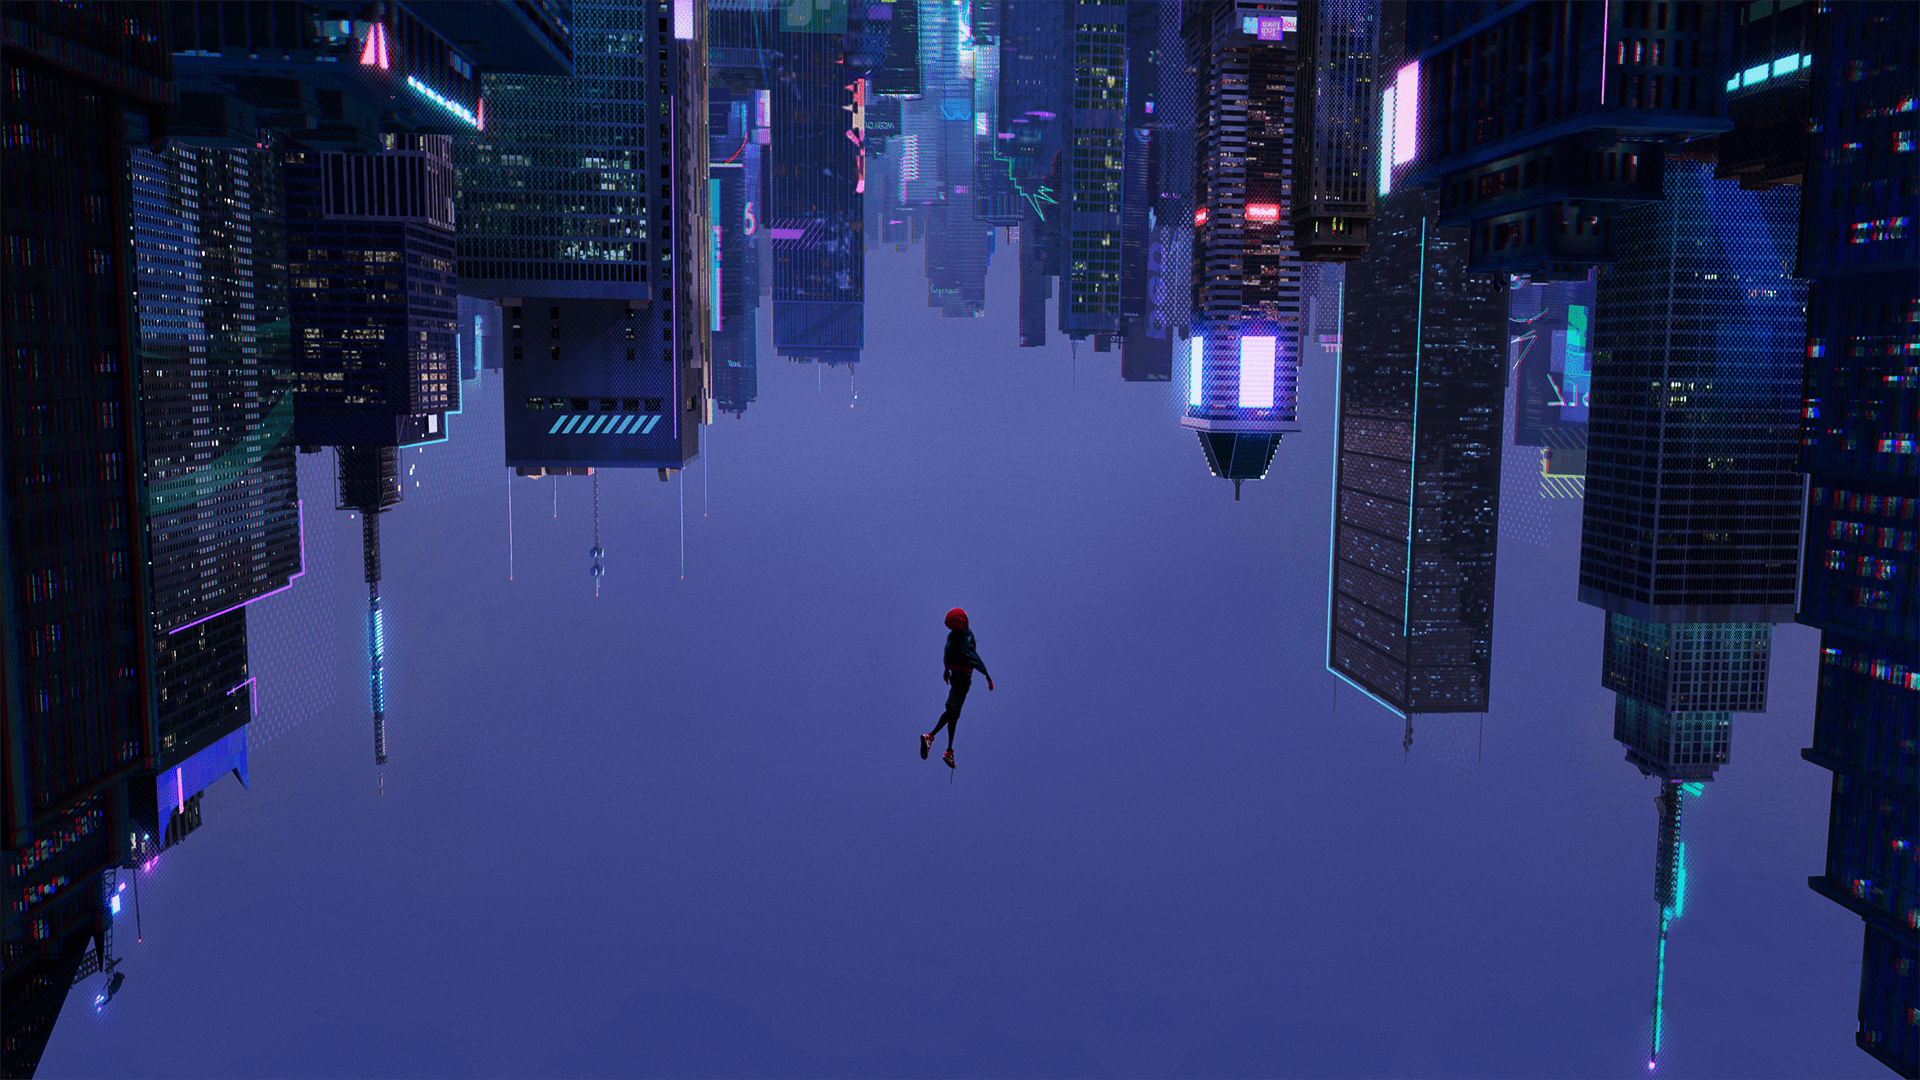 Into The Spider Verse Wallpaper - NawPic